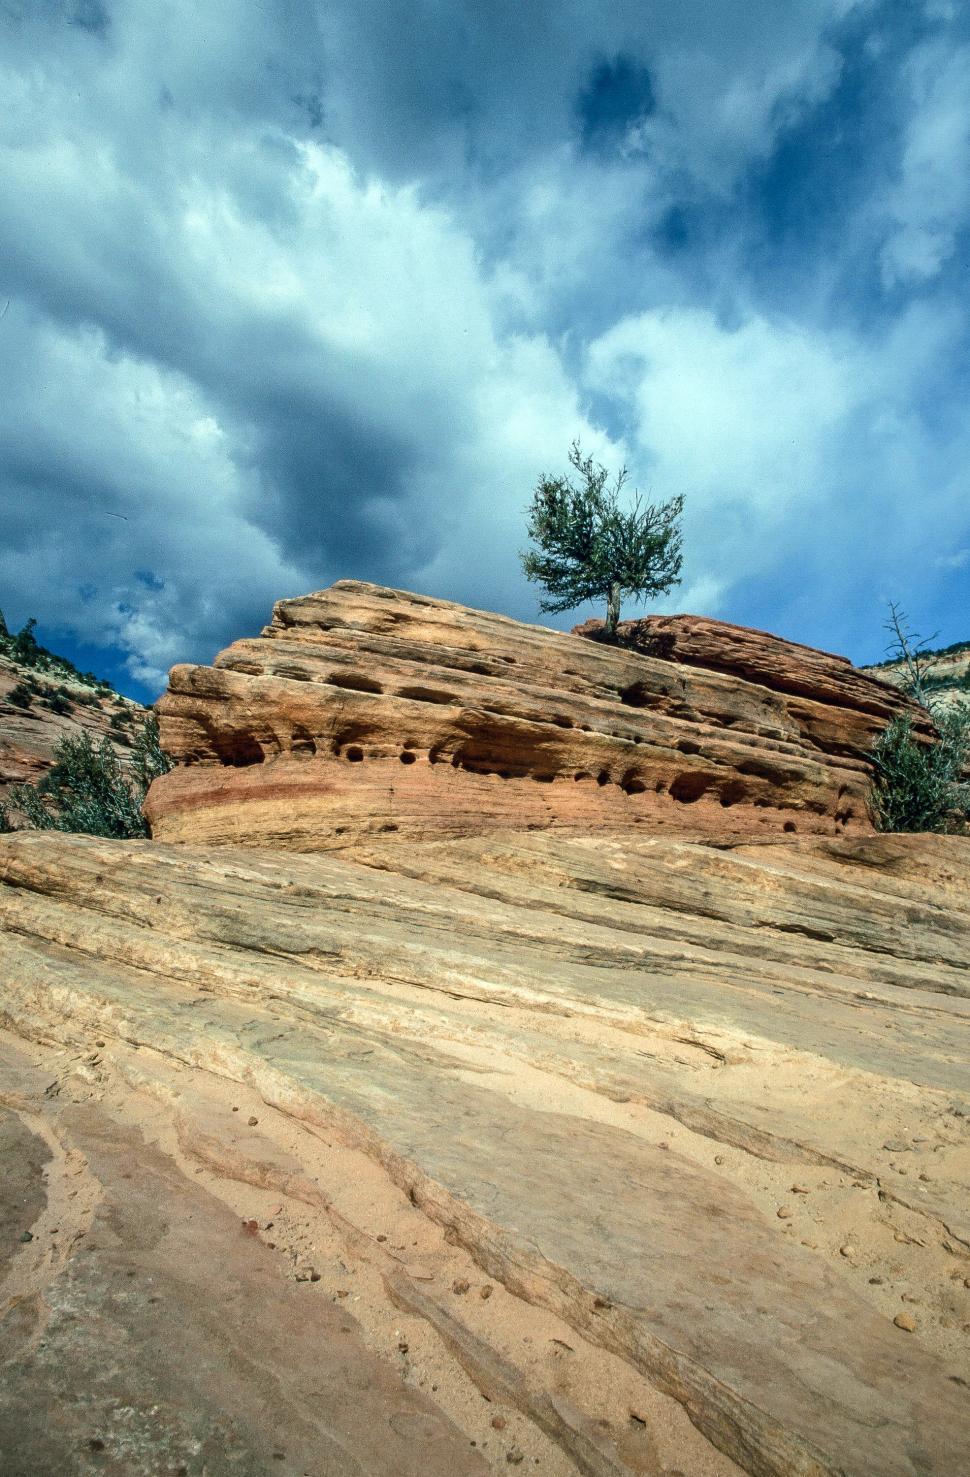 Free Image of Sandstone at Zion National Park in Utah 